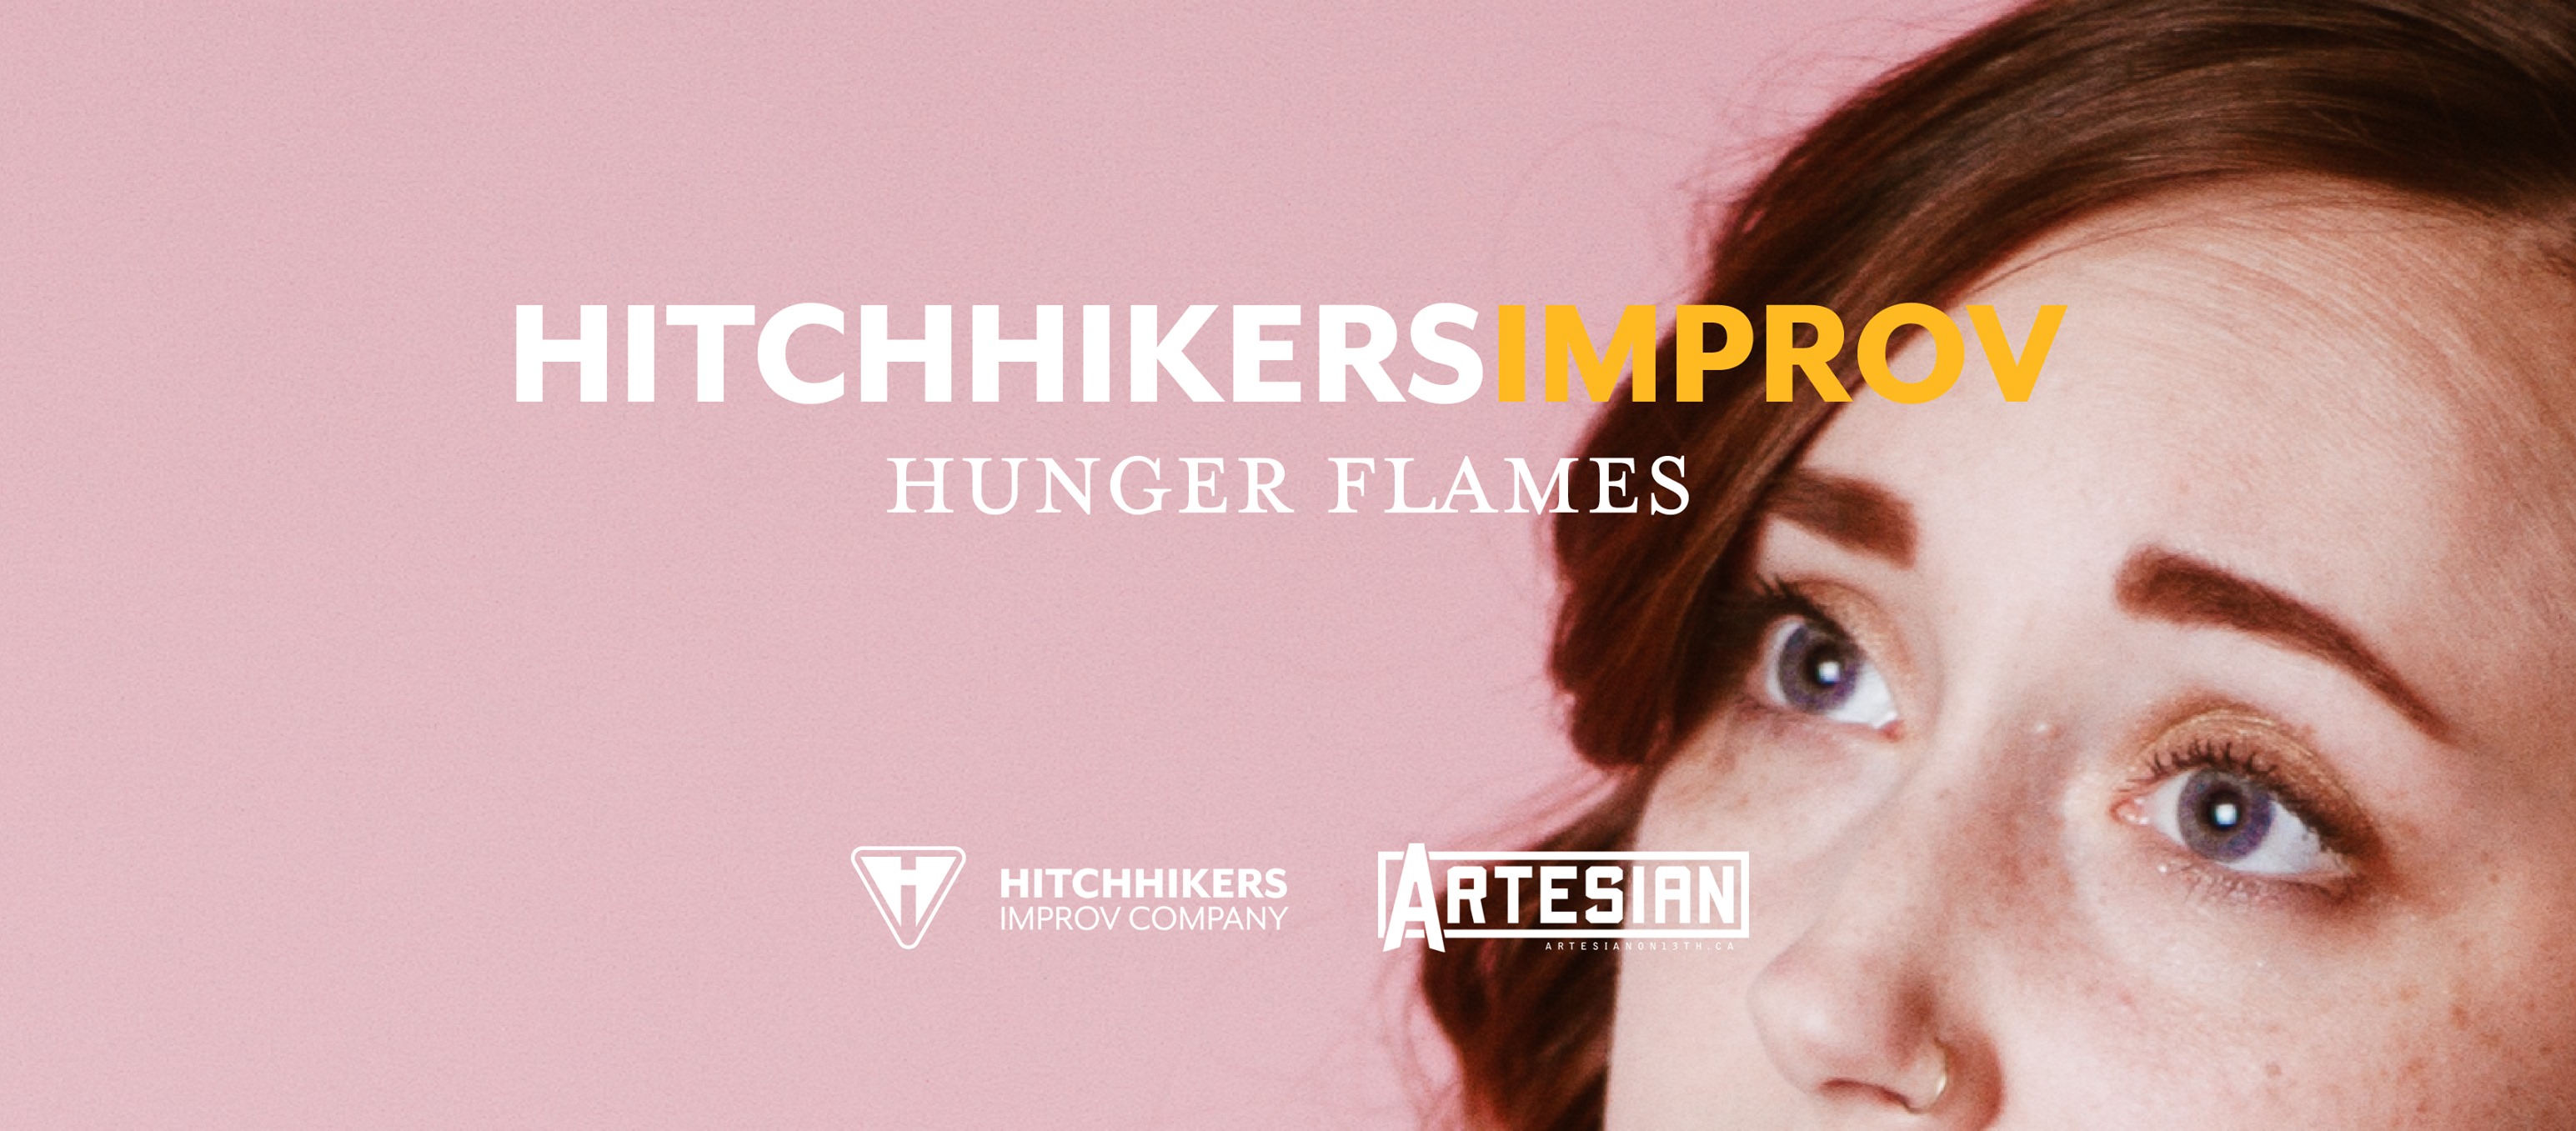 Hitchhikers Improv: Hunger Flames